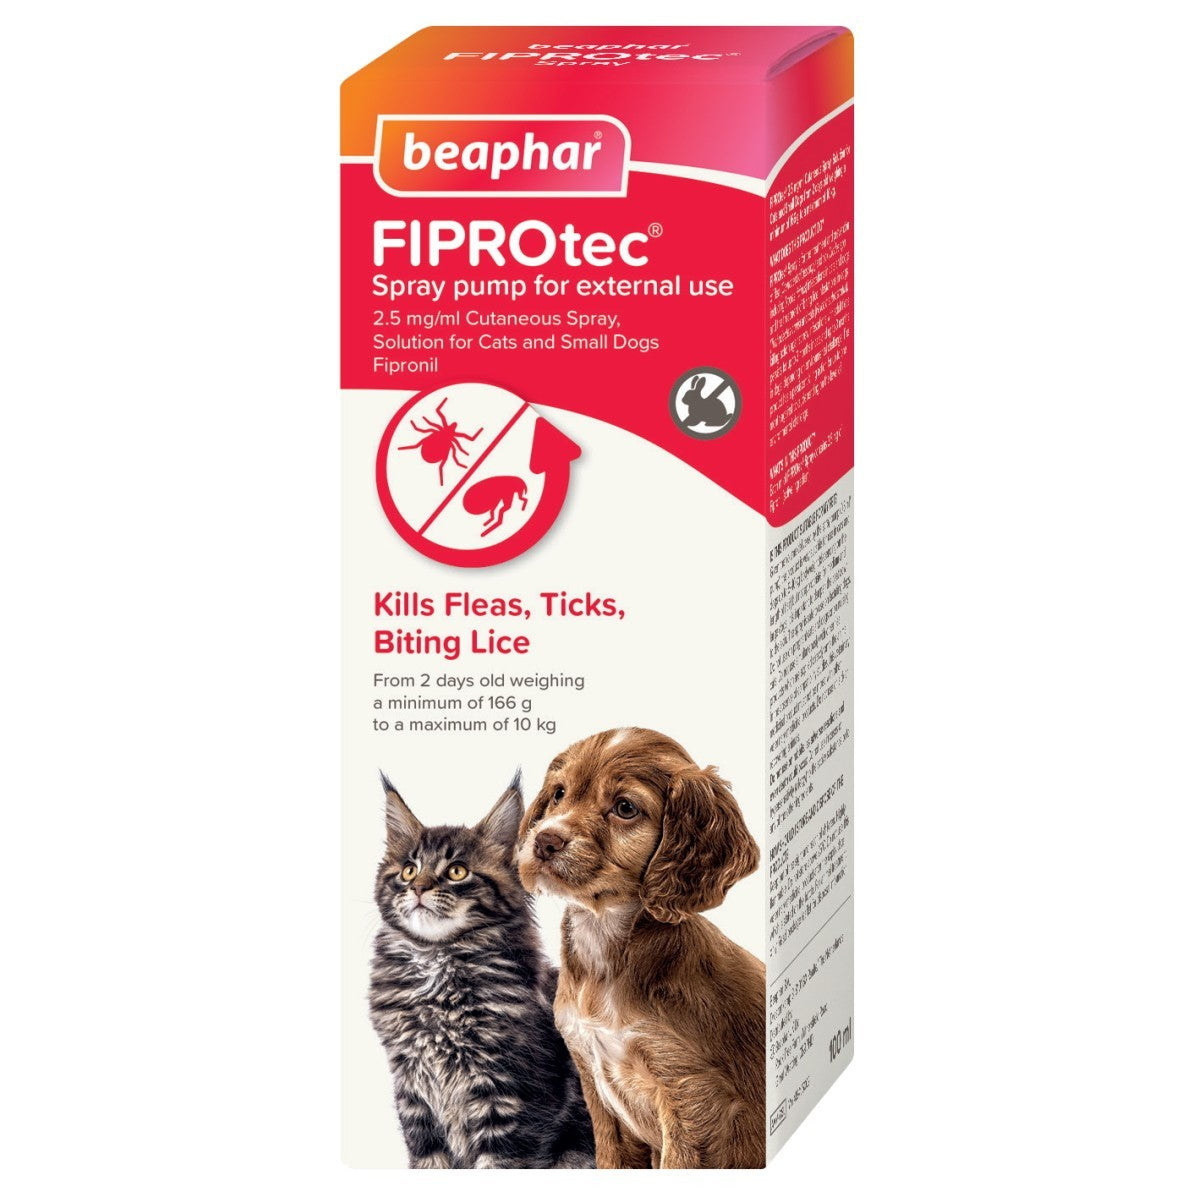 Beaphar Fiprotec Cutaneous Spray Pump 2.5mg/ml for Cats & Small Dogs